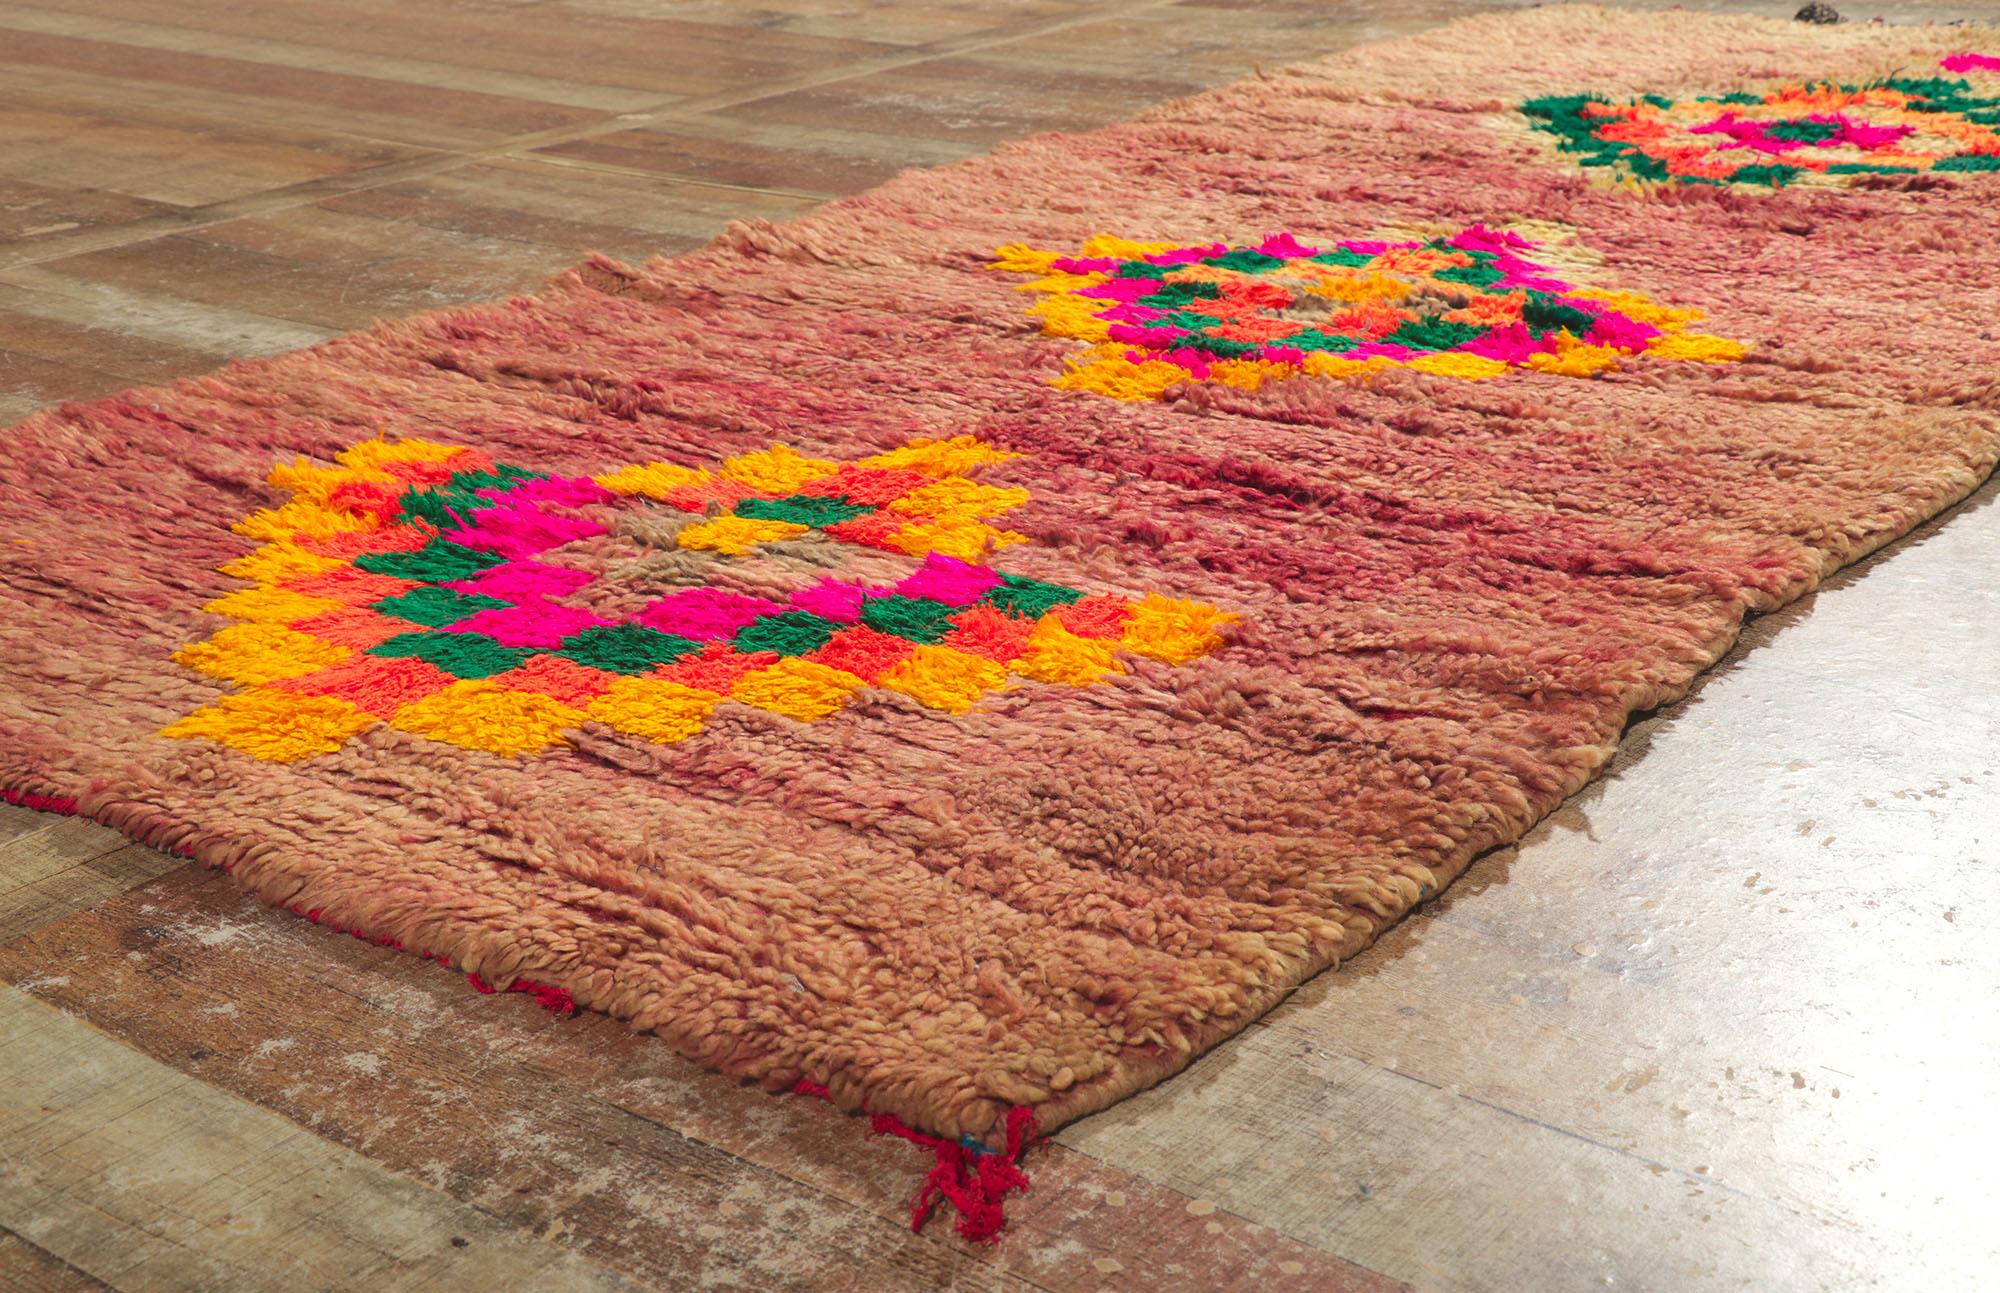 Wool Vintage Berber Moroccan Rug with Tribal Style For Sale